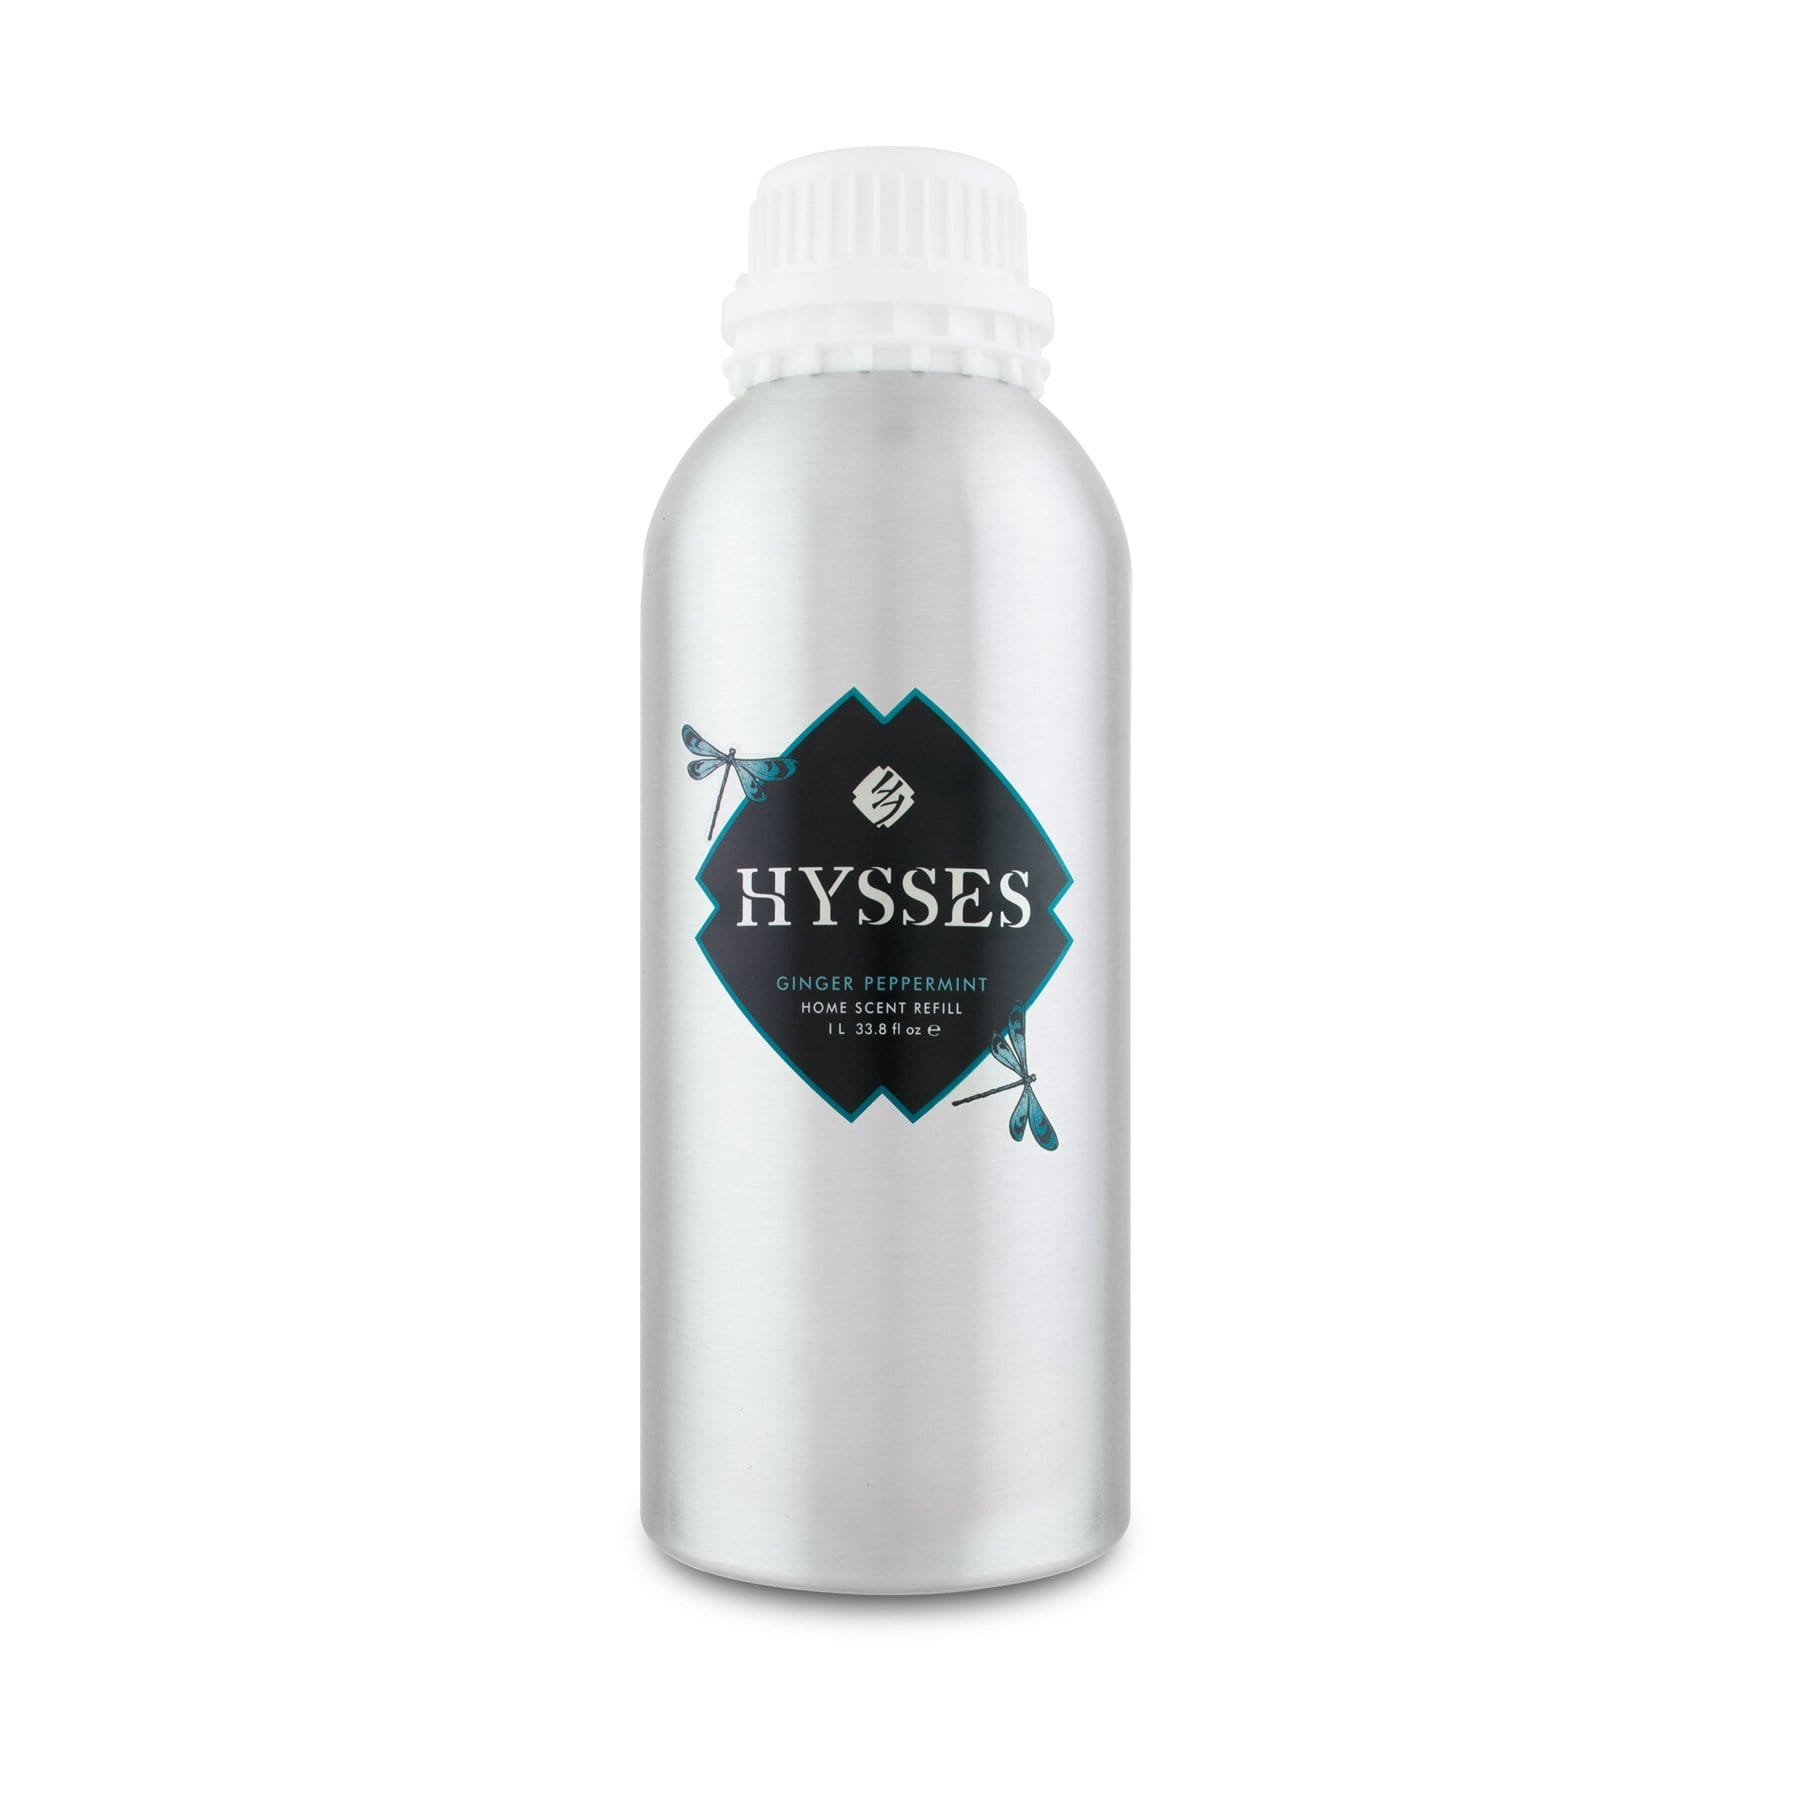 Hysses Home Scents 500ml Refill Home Scent Ginger Peppermint